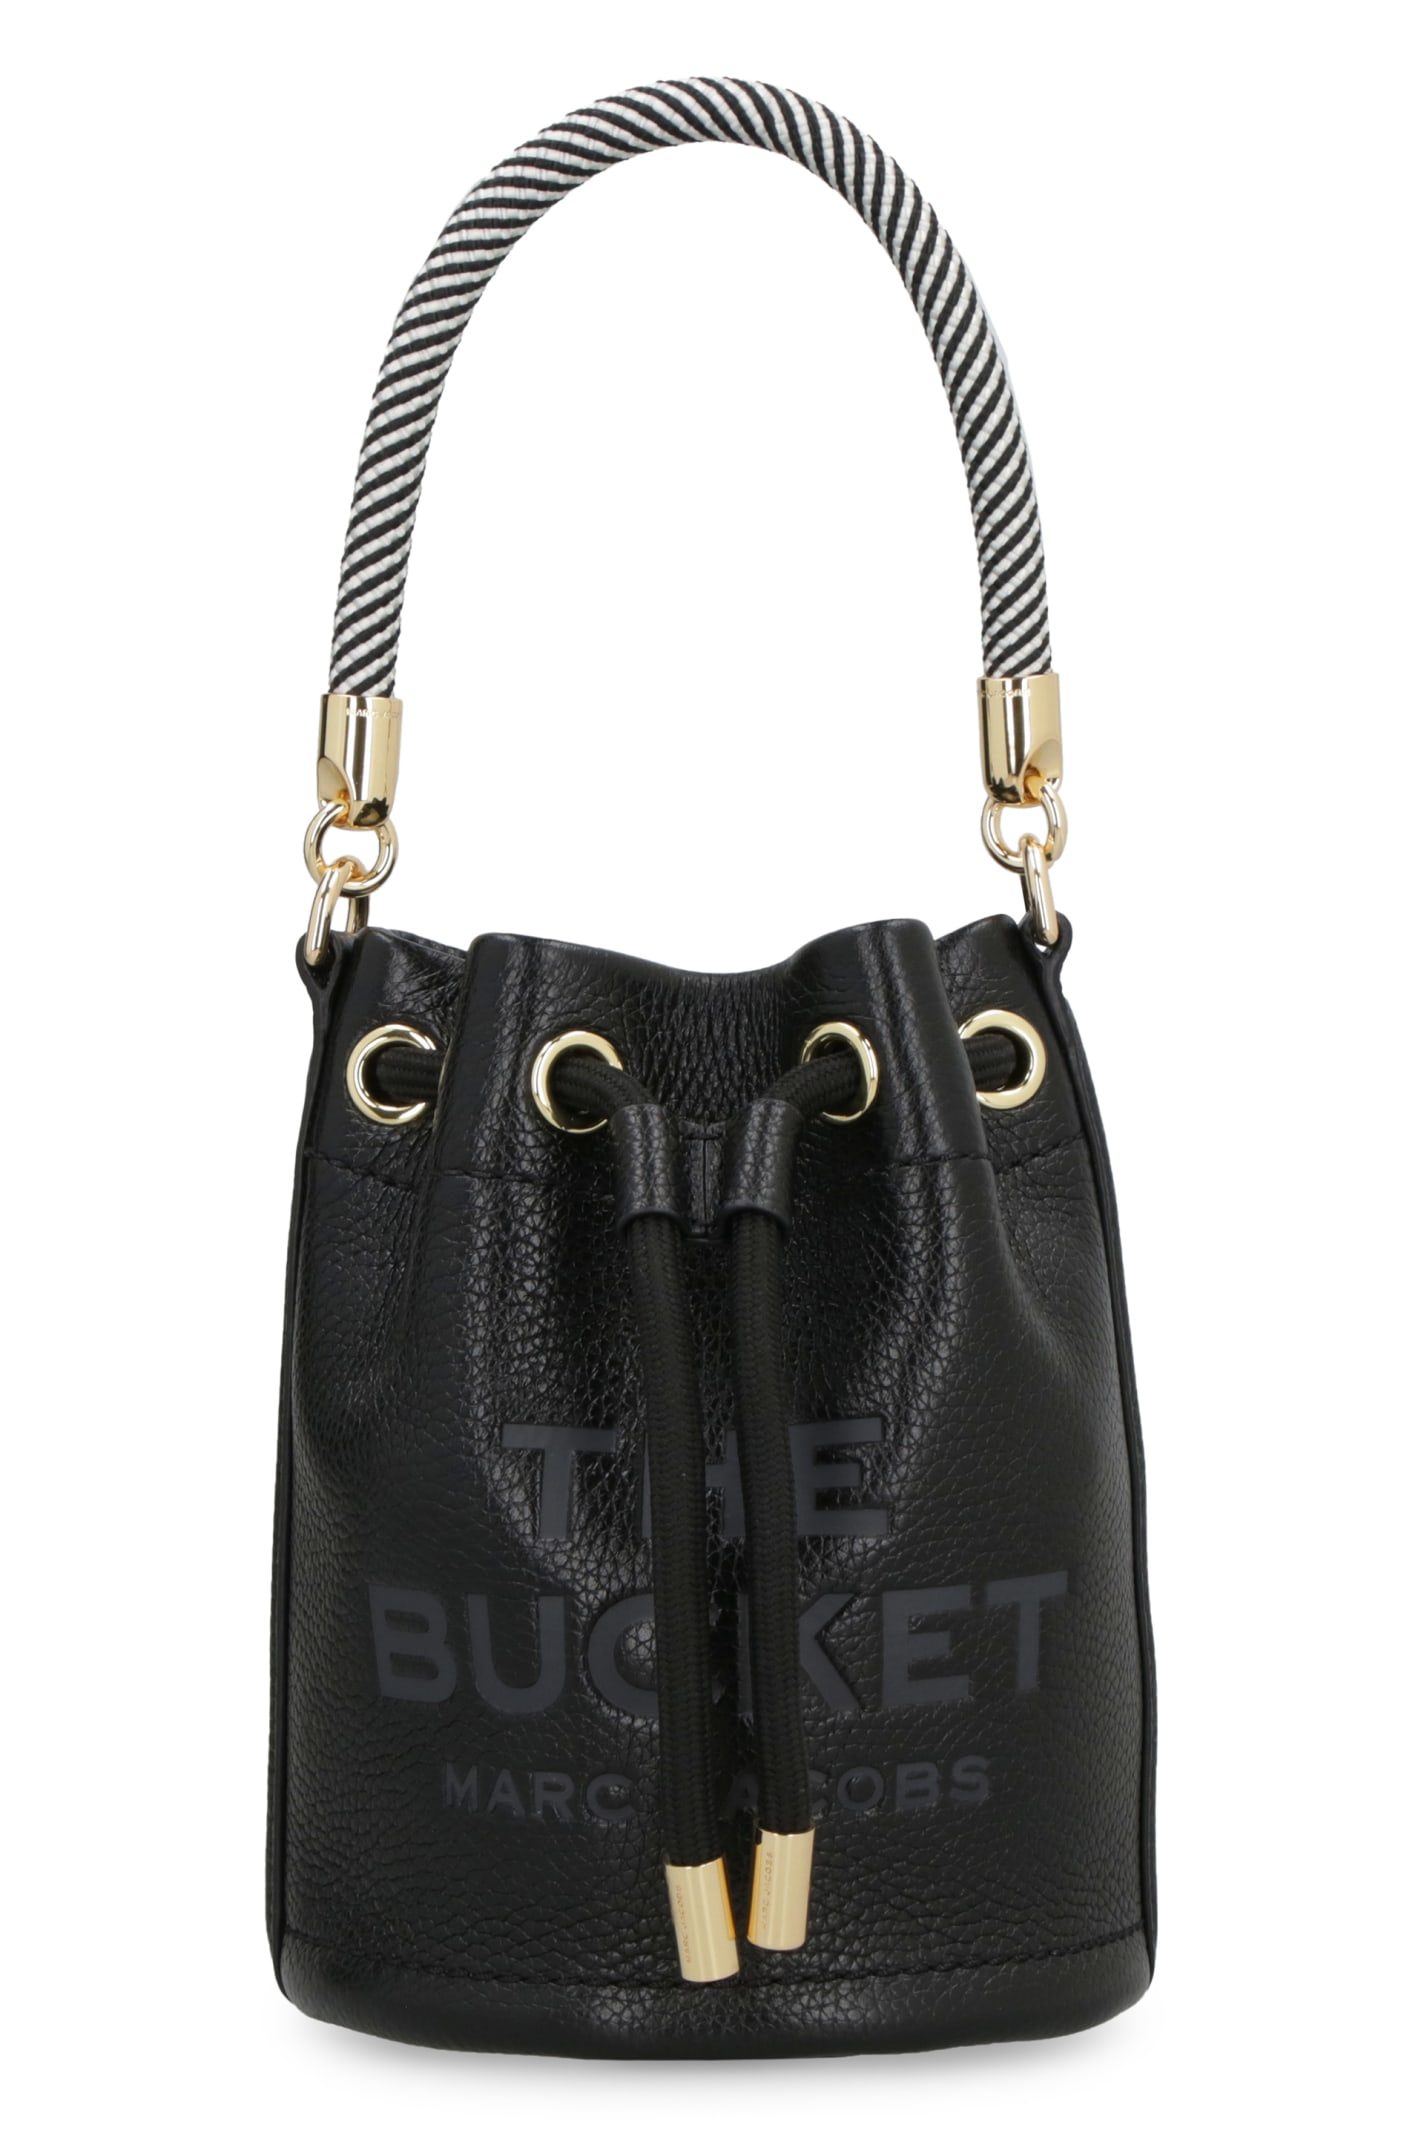 The Leather Micro Bucket Bag